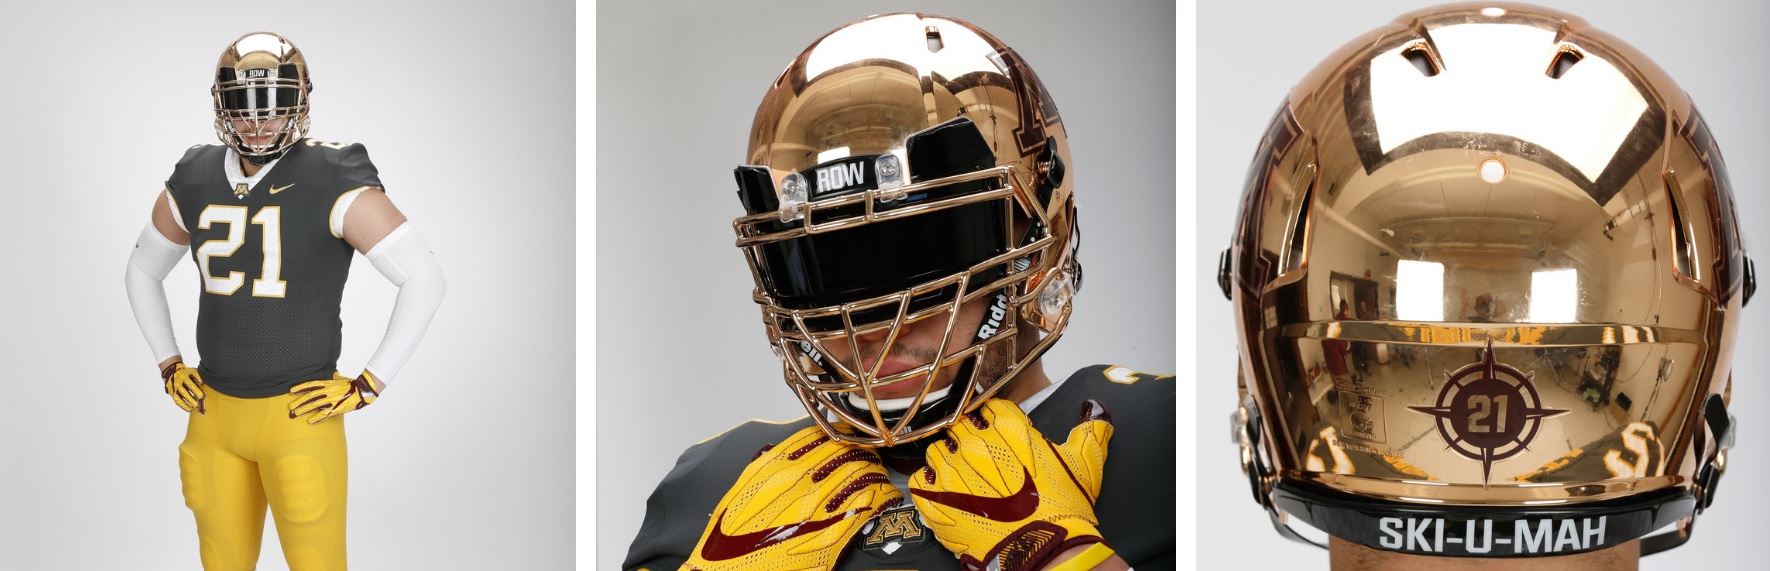 The Minnesota Gophers Football Team Unveils New Nike Uniforms With More